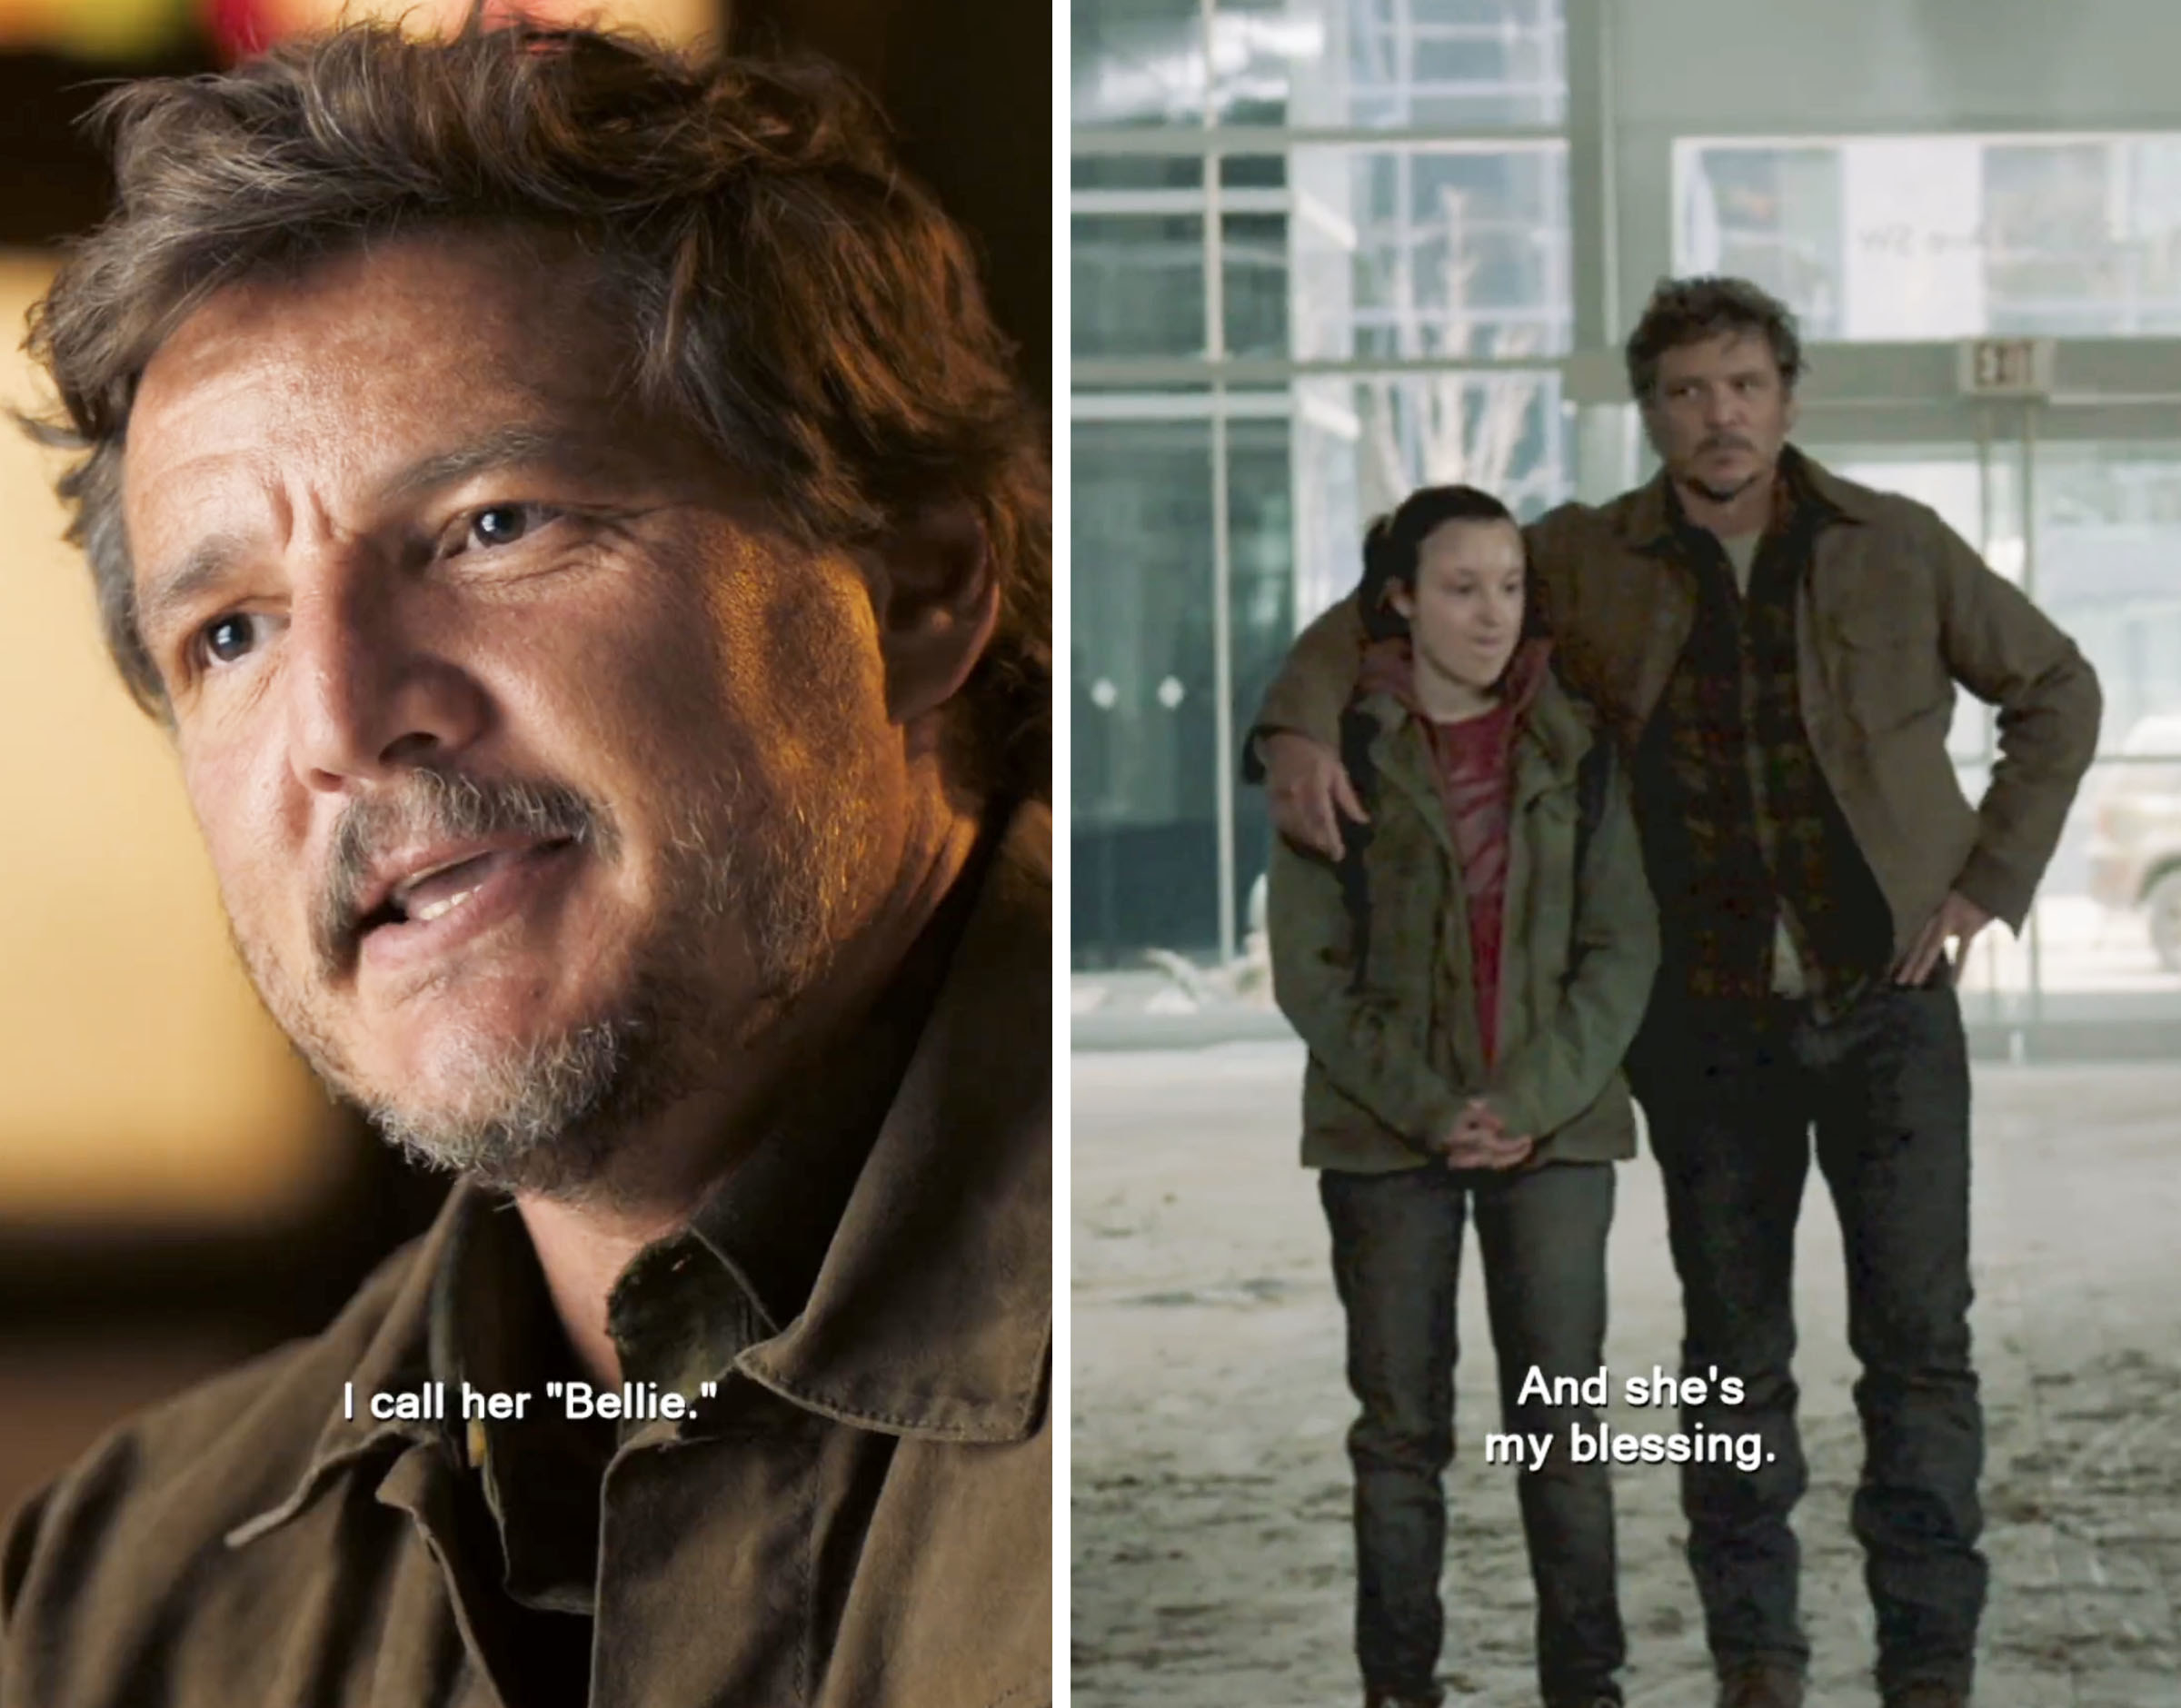 The Last of Us stars Pedro Pascal and Bella Ramsey talk Clickers